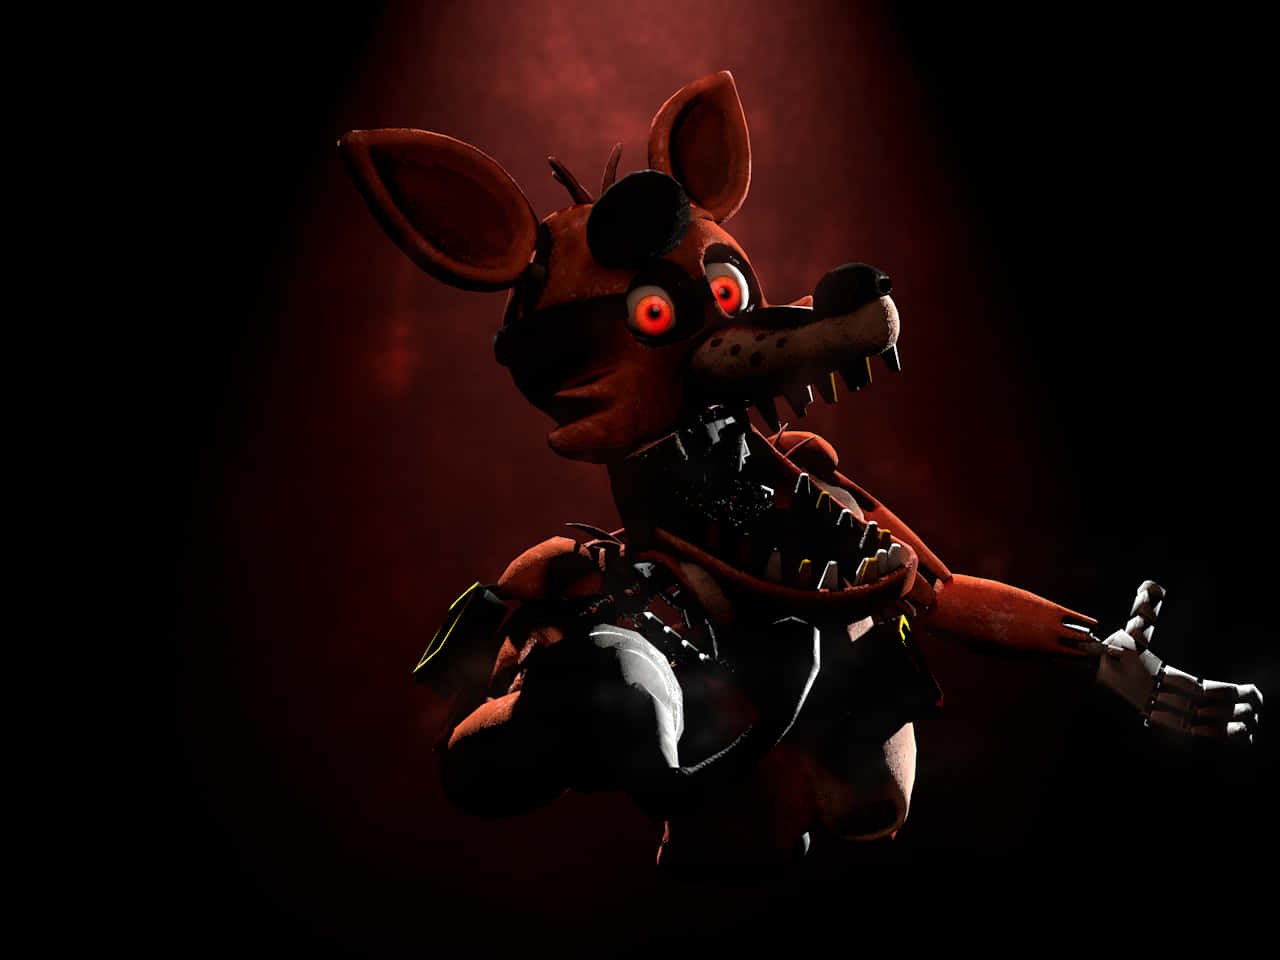 “The Mischievous Foxy From Five Nights At Freddy’s” Wallpaper